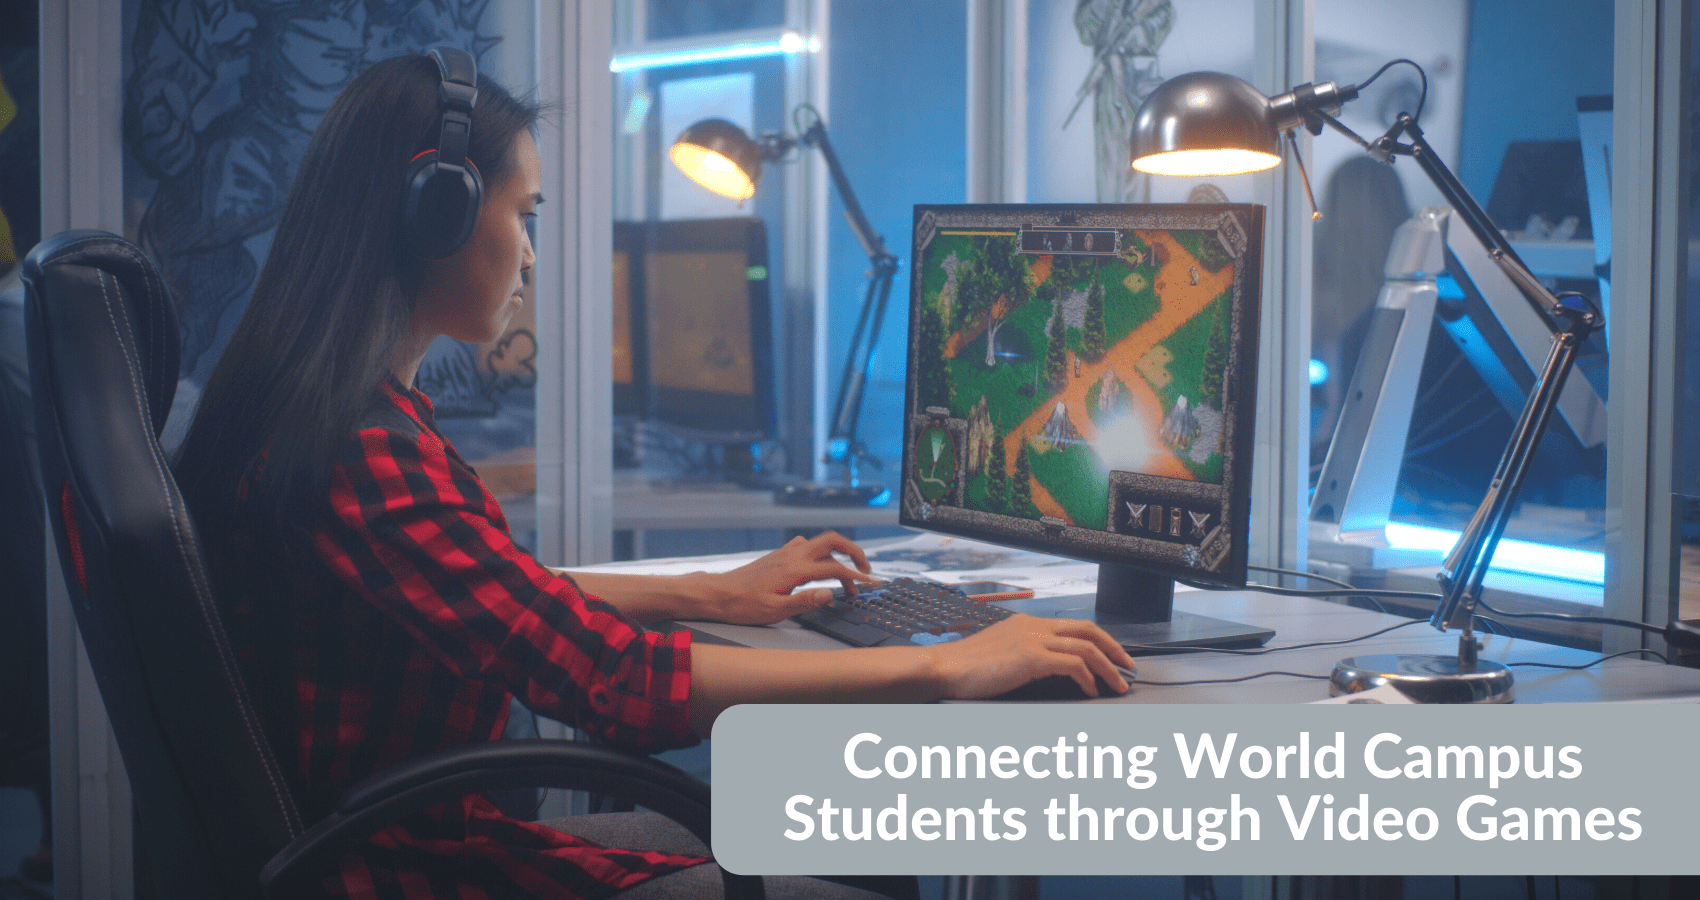 A person with long dark hair and headphones plays a video game at their computer. Text in bottom right reads: "Connecting World Campus Students through Video Games."